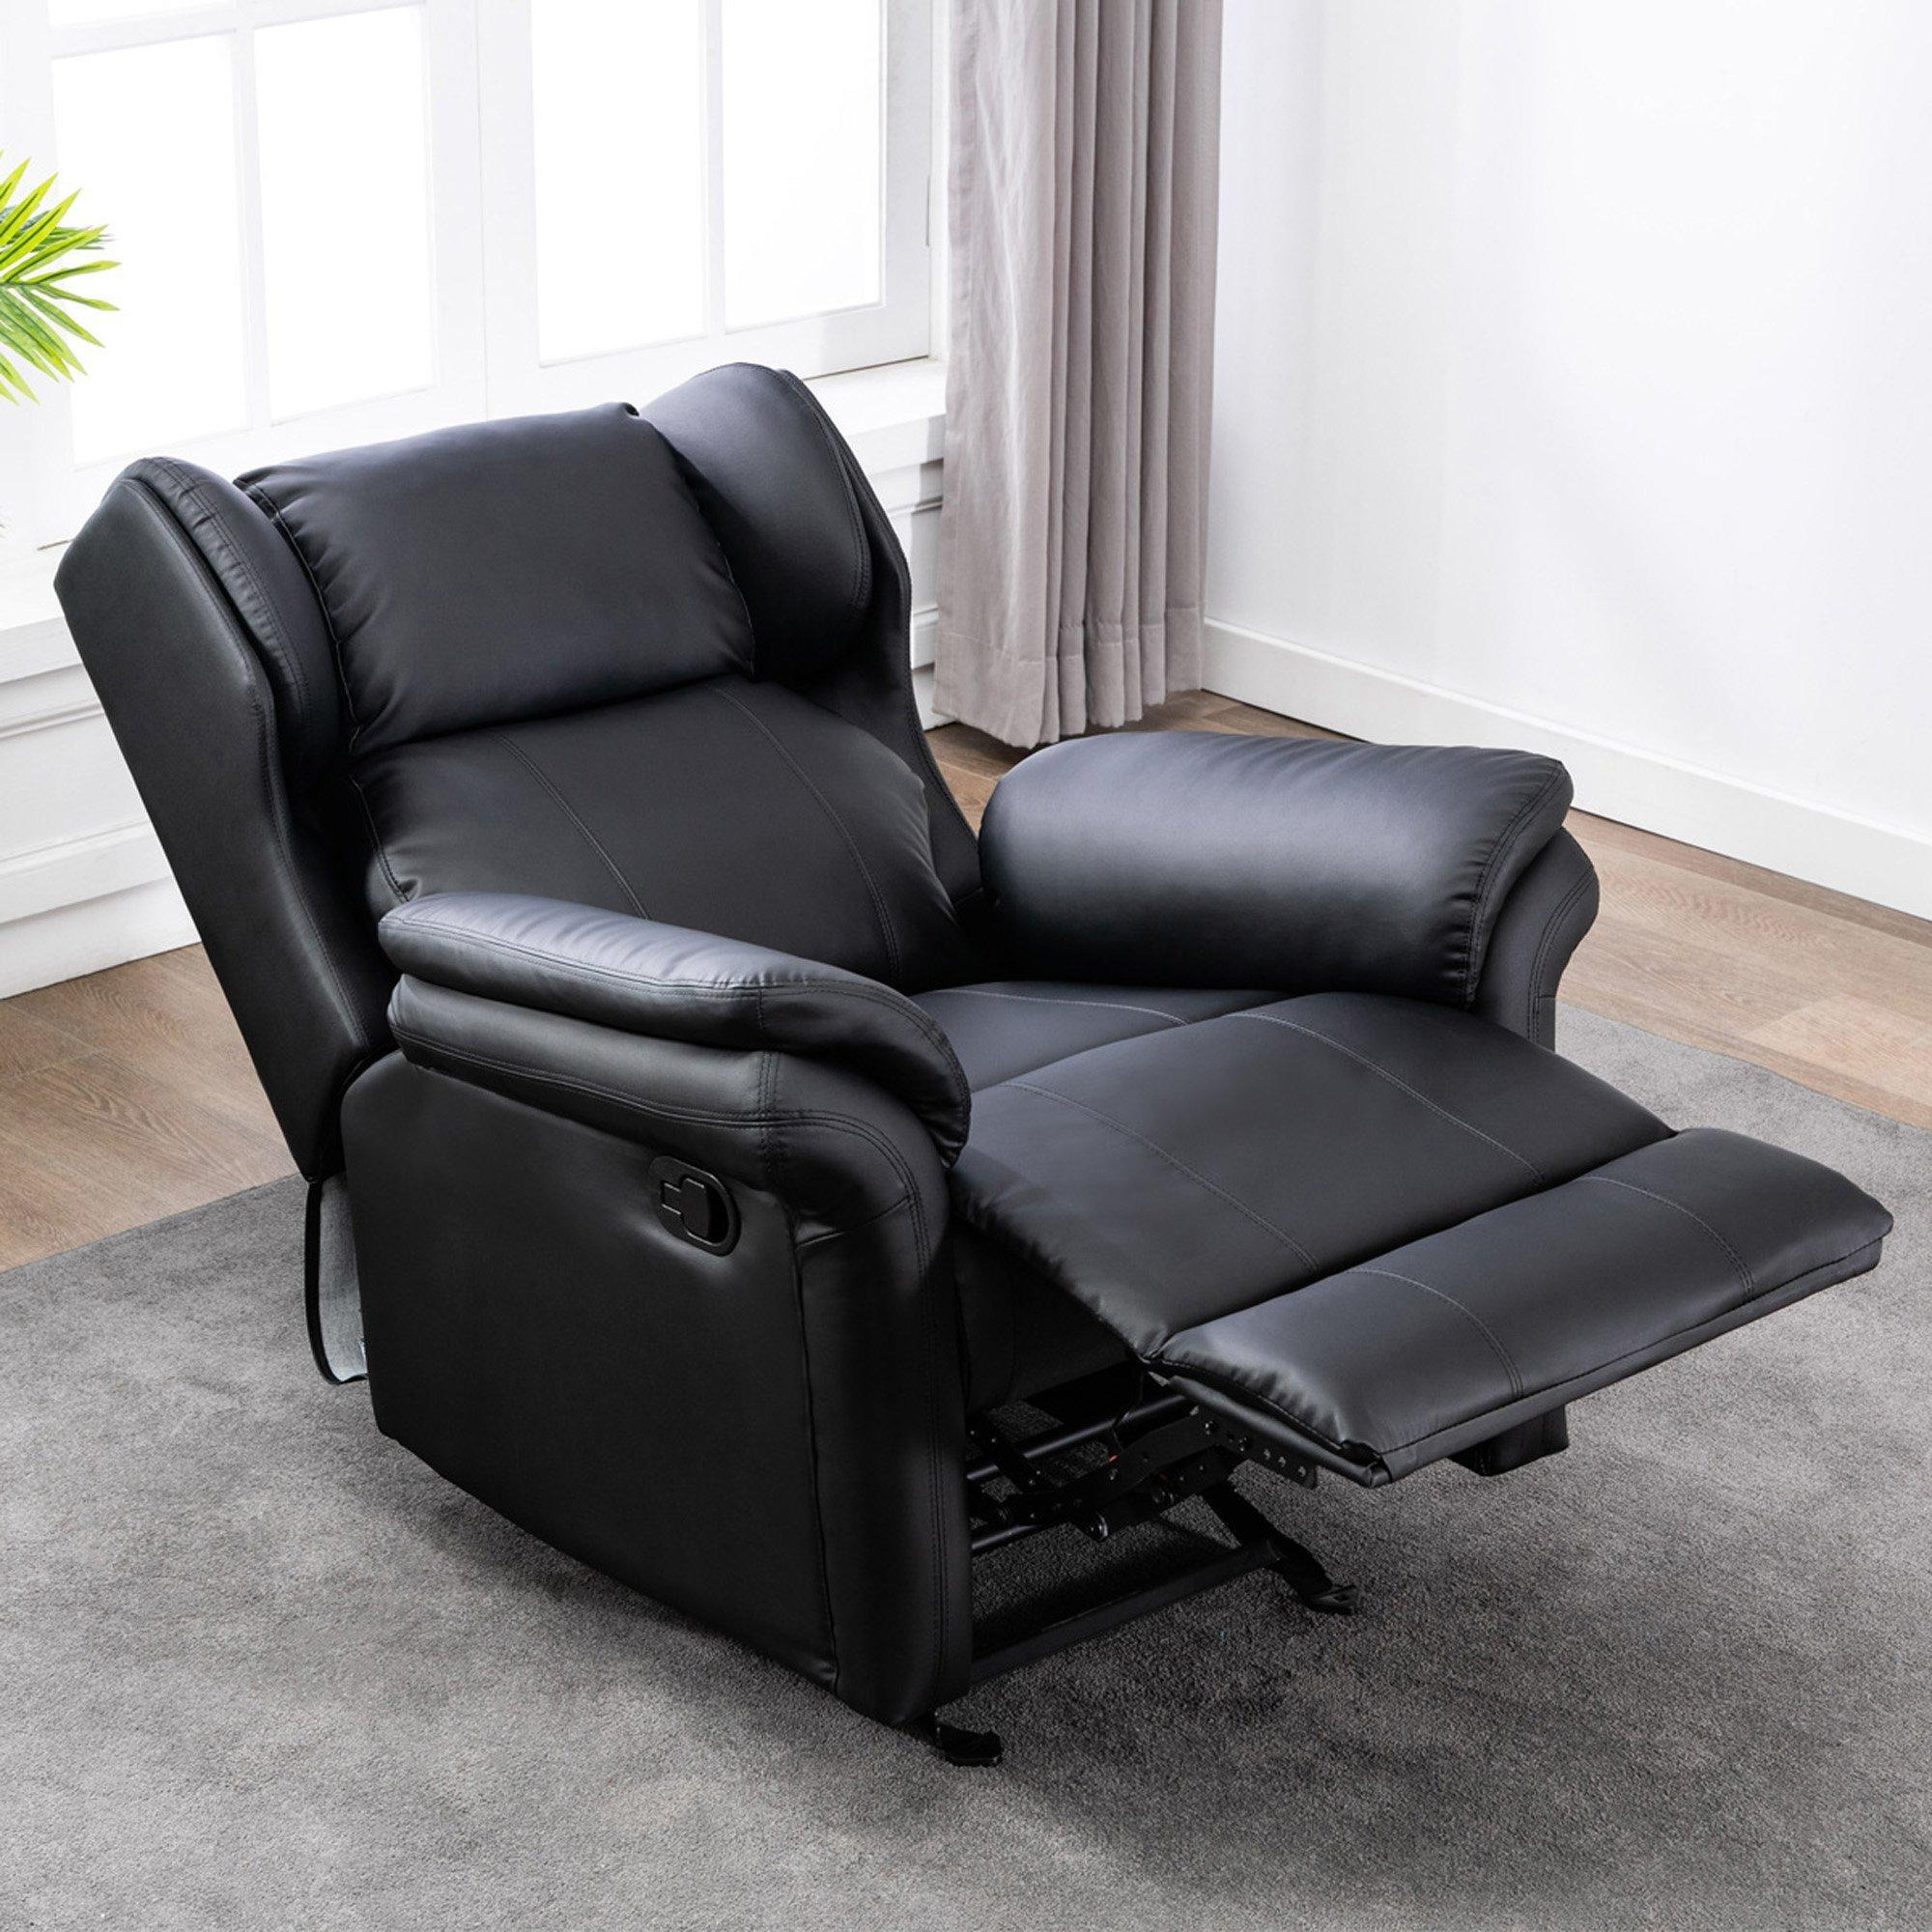 Oakley Manual Recliner Rocking Chair Wingback Design Bonded Leather - image 1